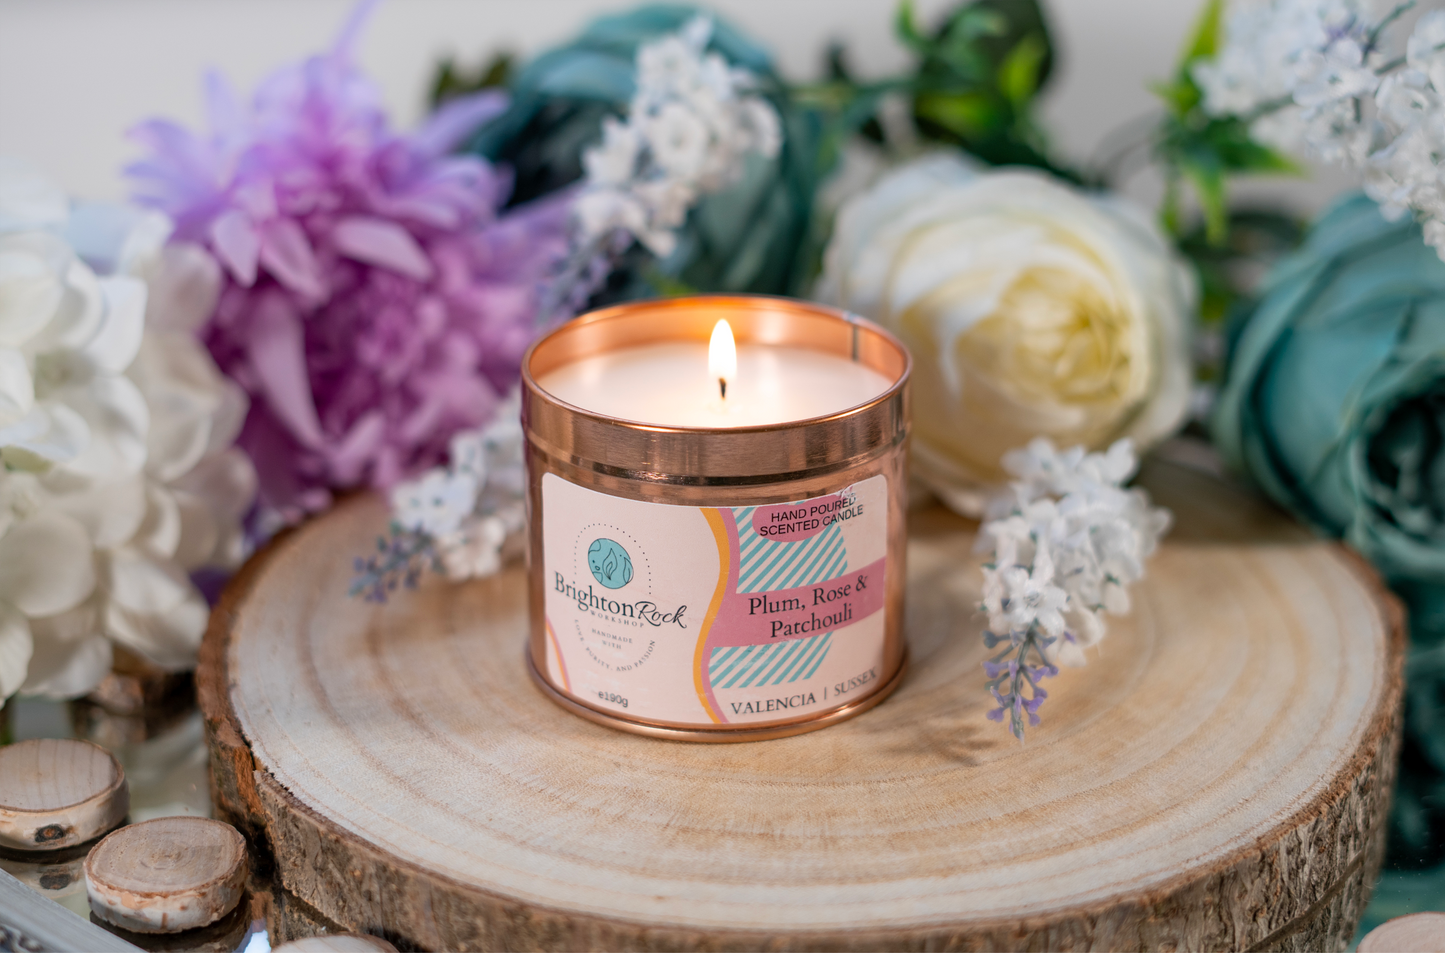 plum, rose & patchouli scented candle in a rose gold tin with matching lid. Brighton Rock Workshop strongly-scented candles. 190g eco-friendly, sustainable, recyclable packaging, vegan friendly and cruelty free